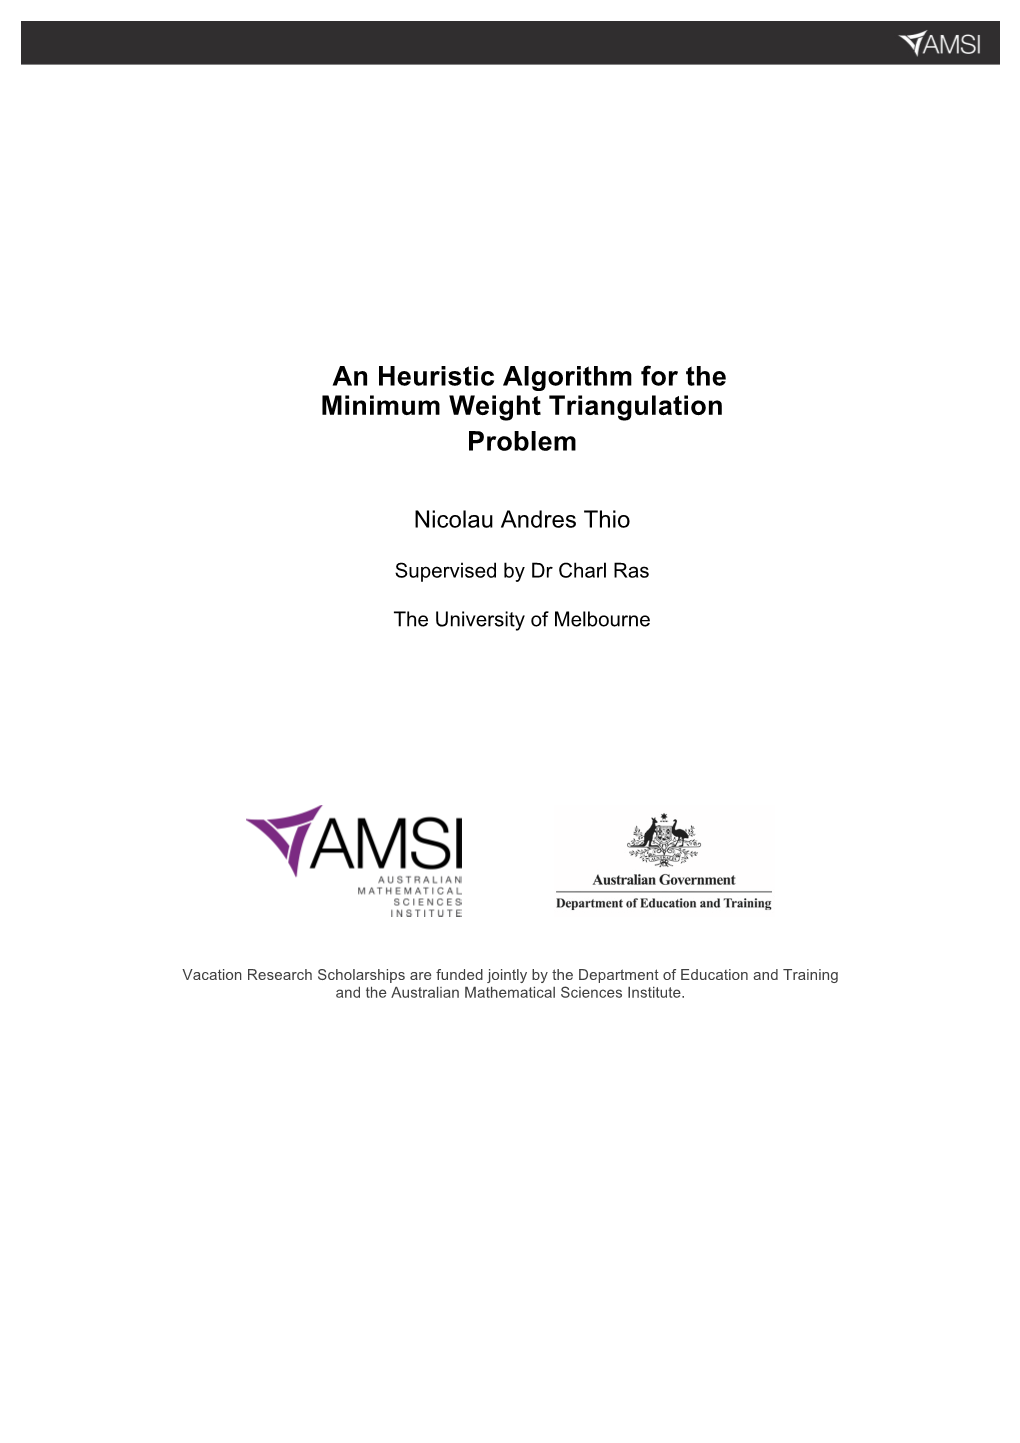 An Heuristic Algorithm for the Minimum Weight Triangulation Problem